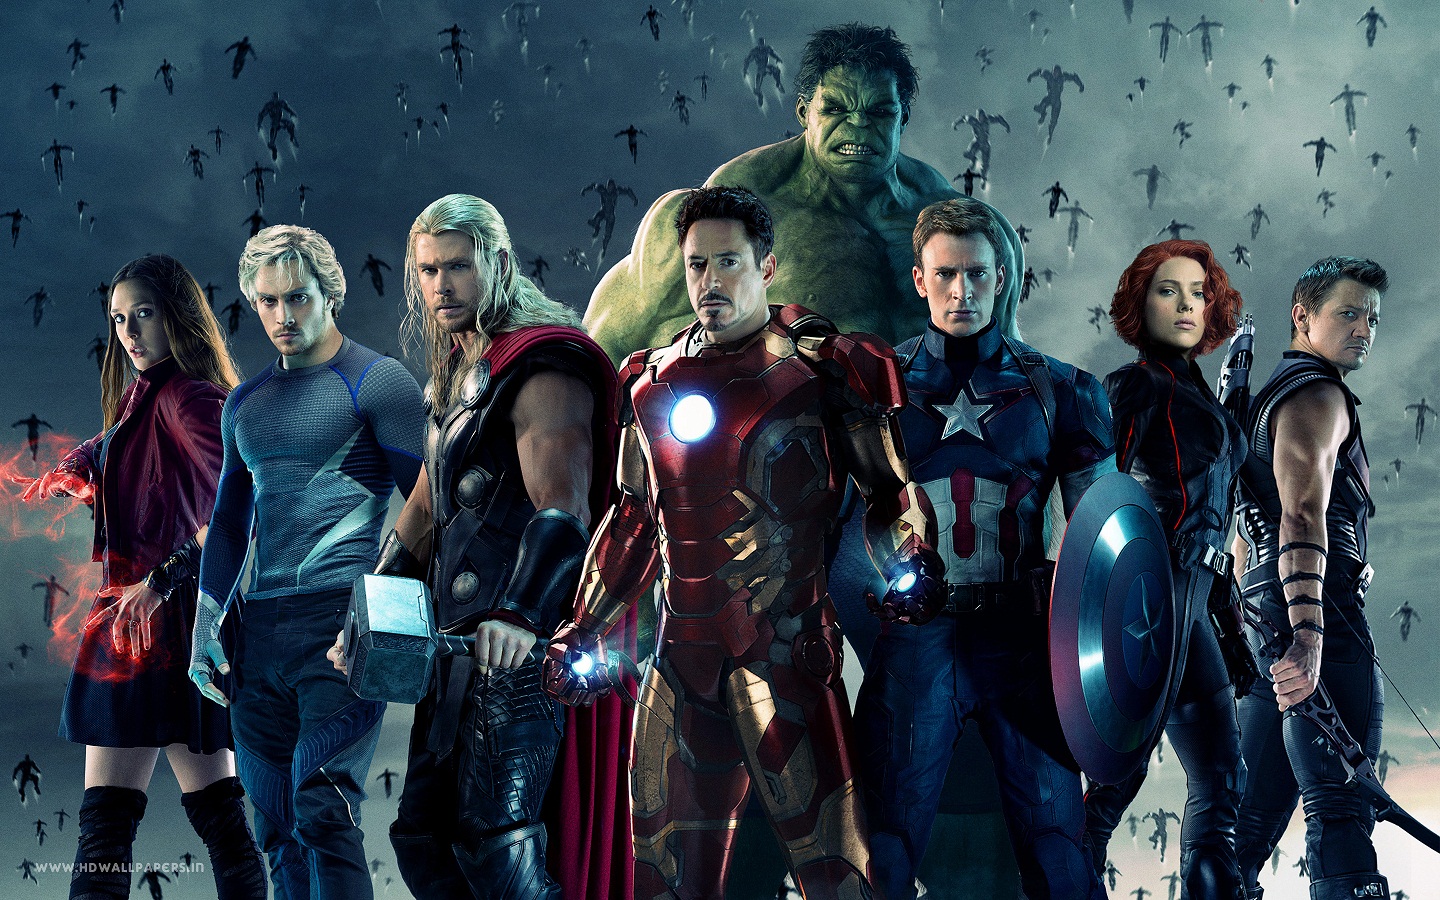 'Avengers: Age of Ultron' Scores Second Biggest Opening With $187.7 million